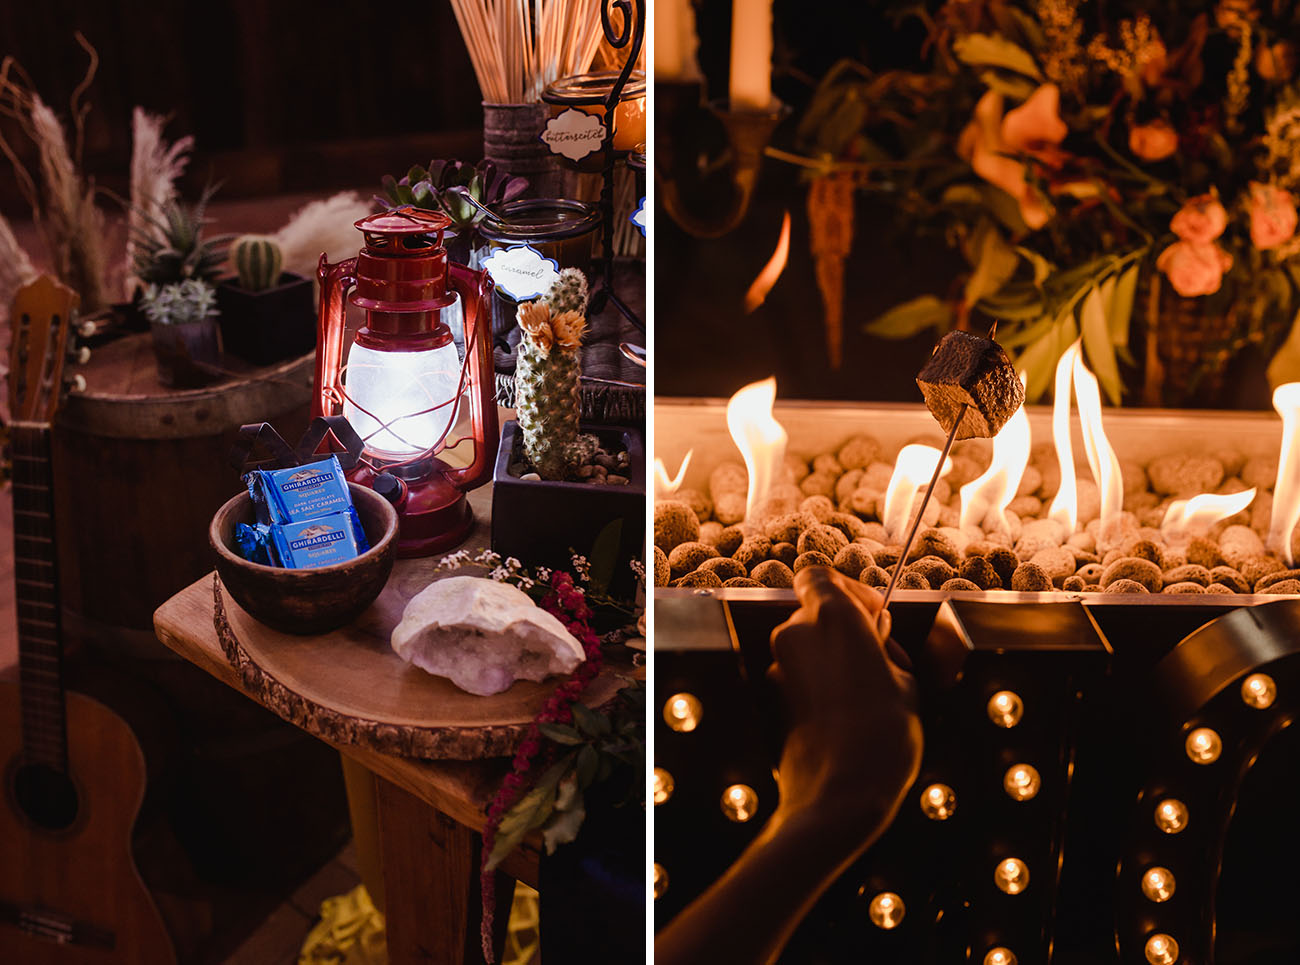 This is a gorgeous and fun idea for a witchy wedding, too